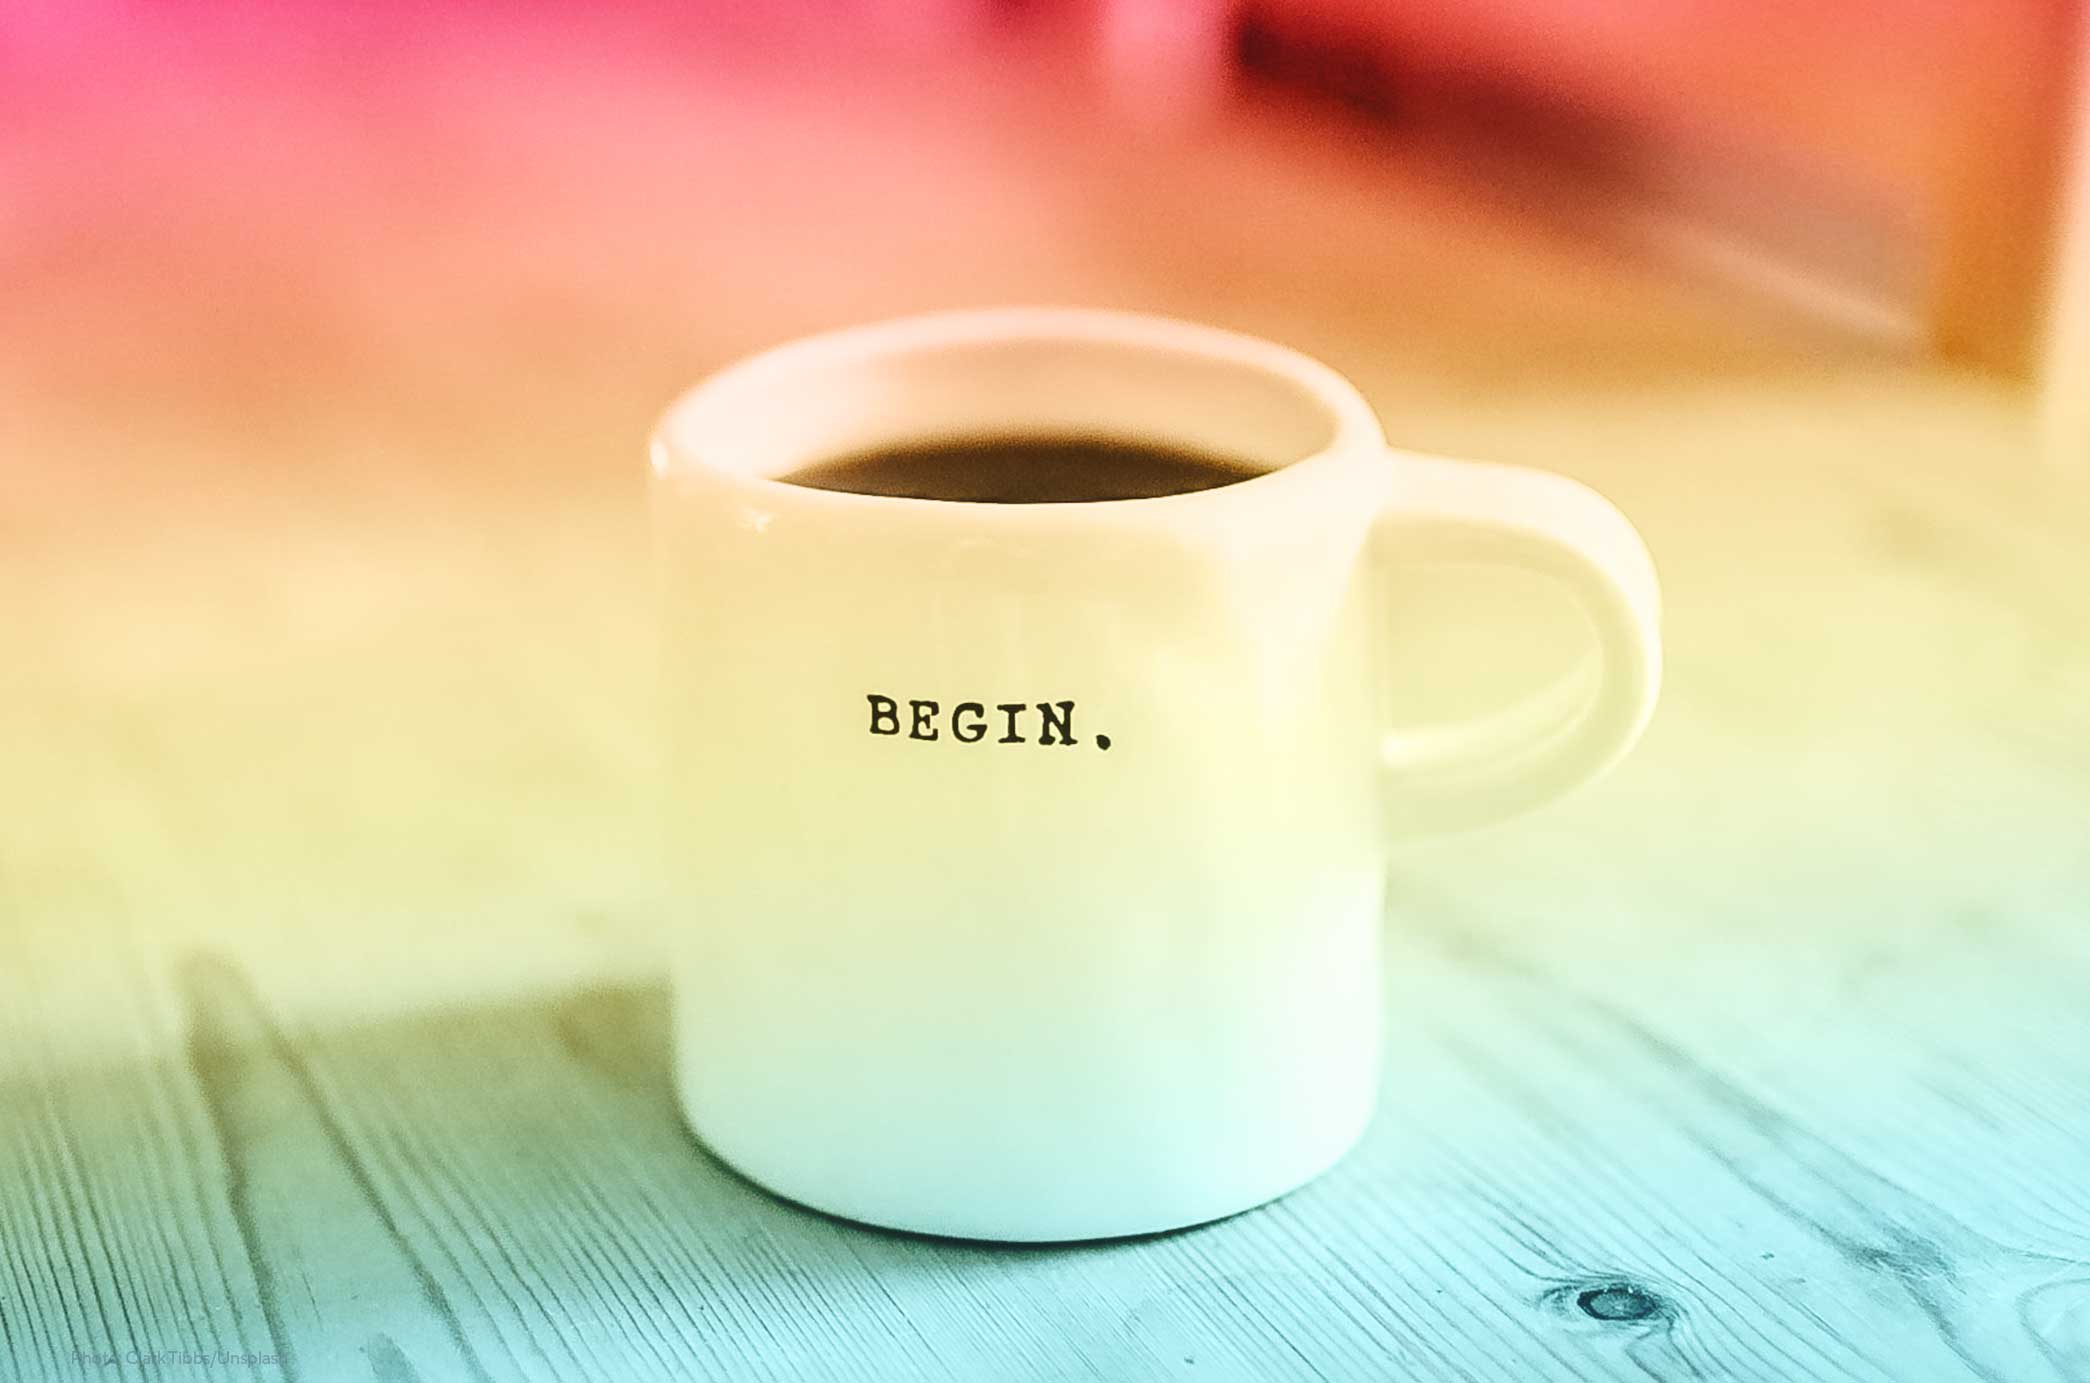 Coffee cup with the word “Begin” on it